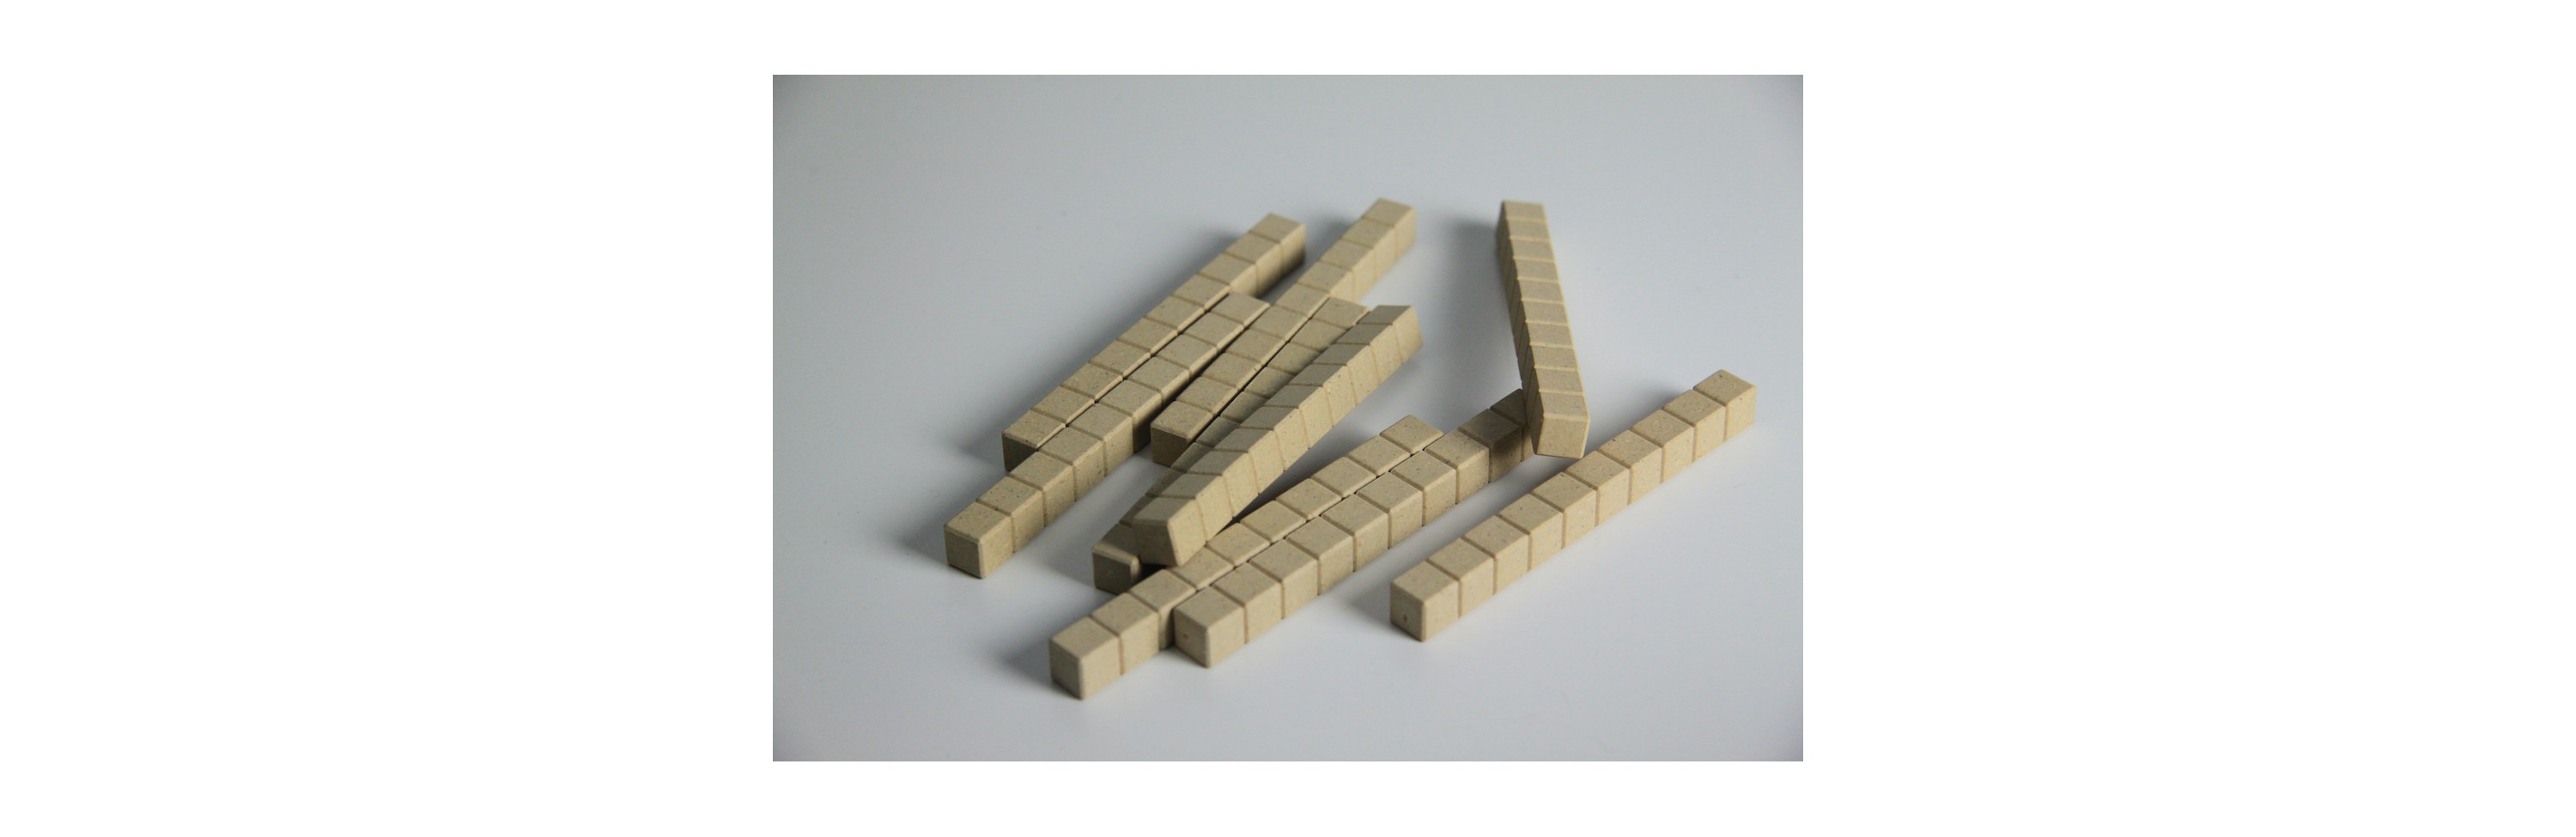 Wissner® active learning - Dienes Base Ten Rods in natural colours (10 pcs) RE-Wood®